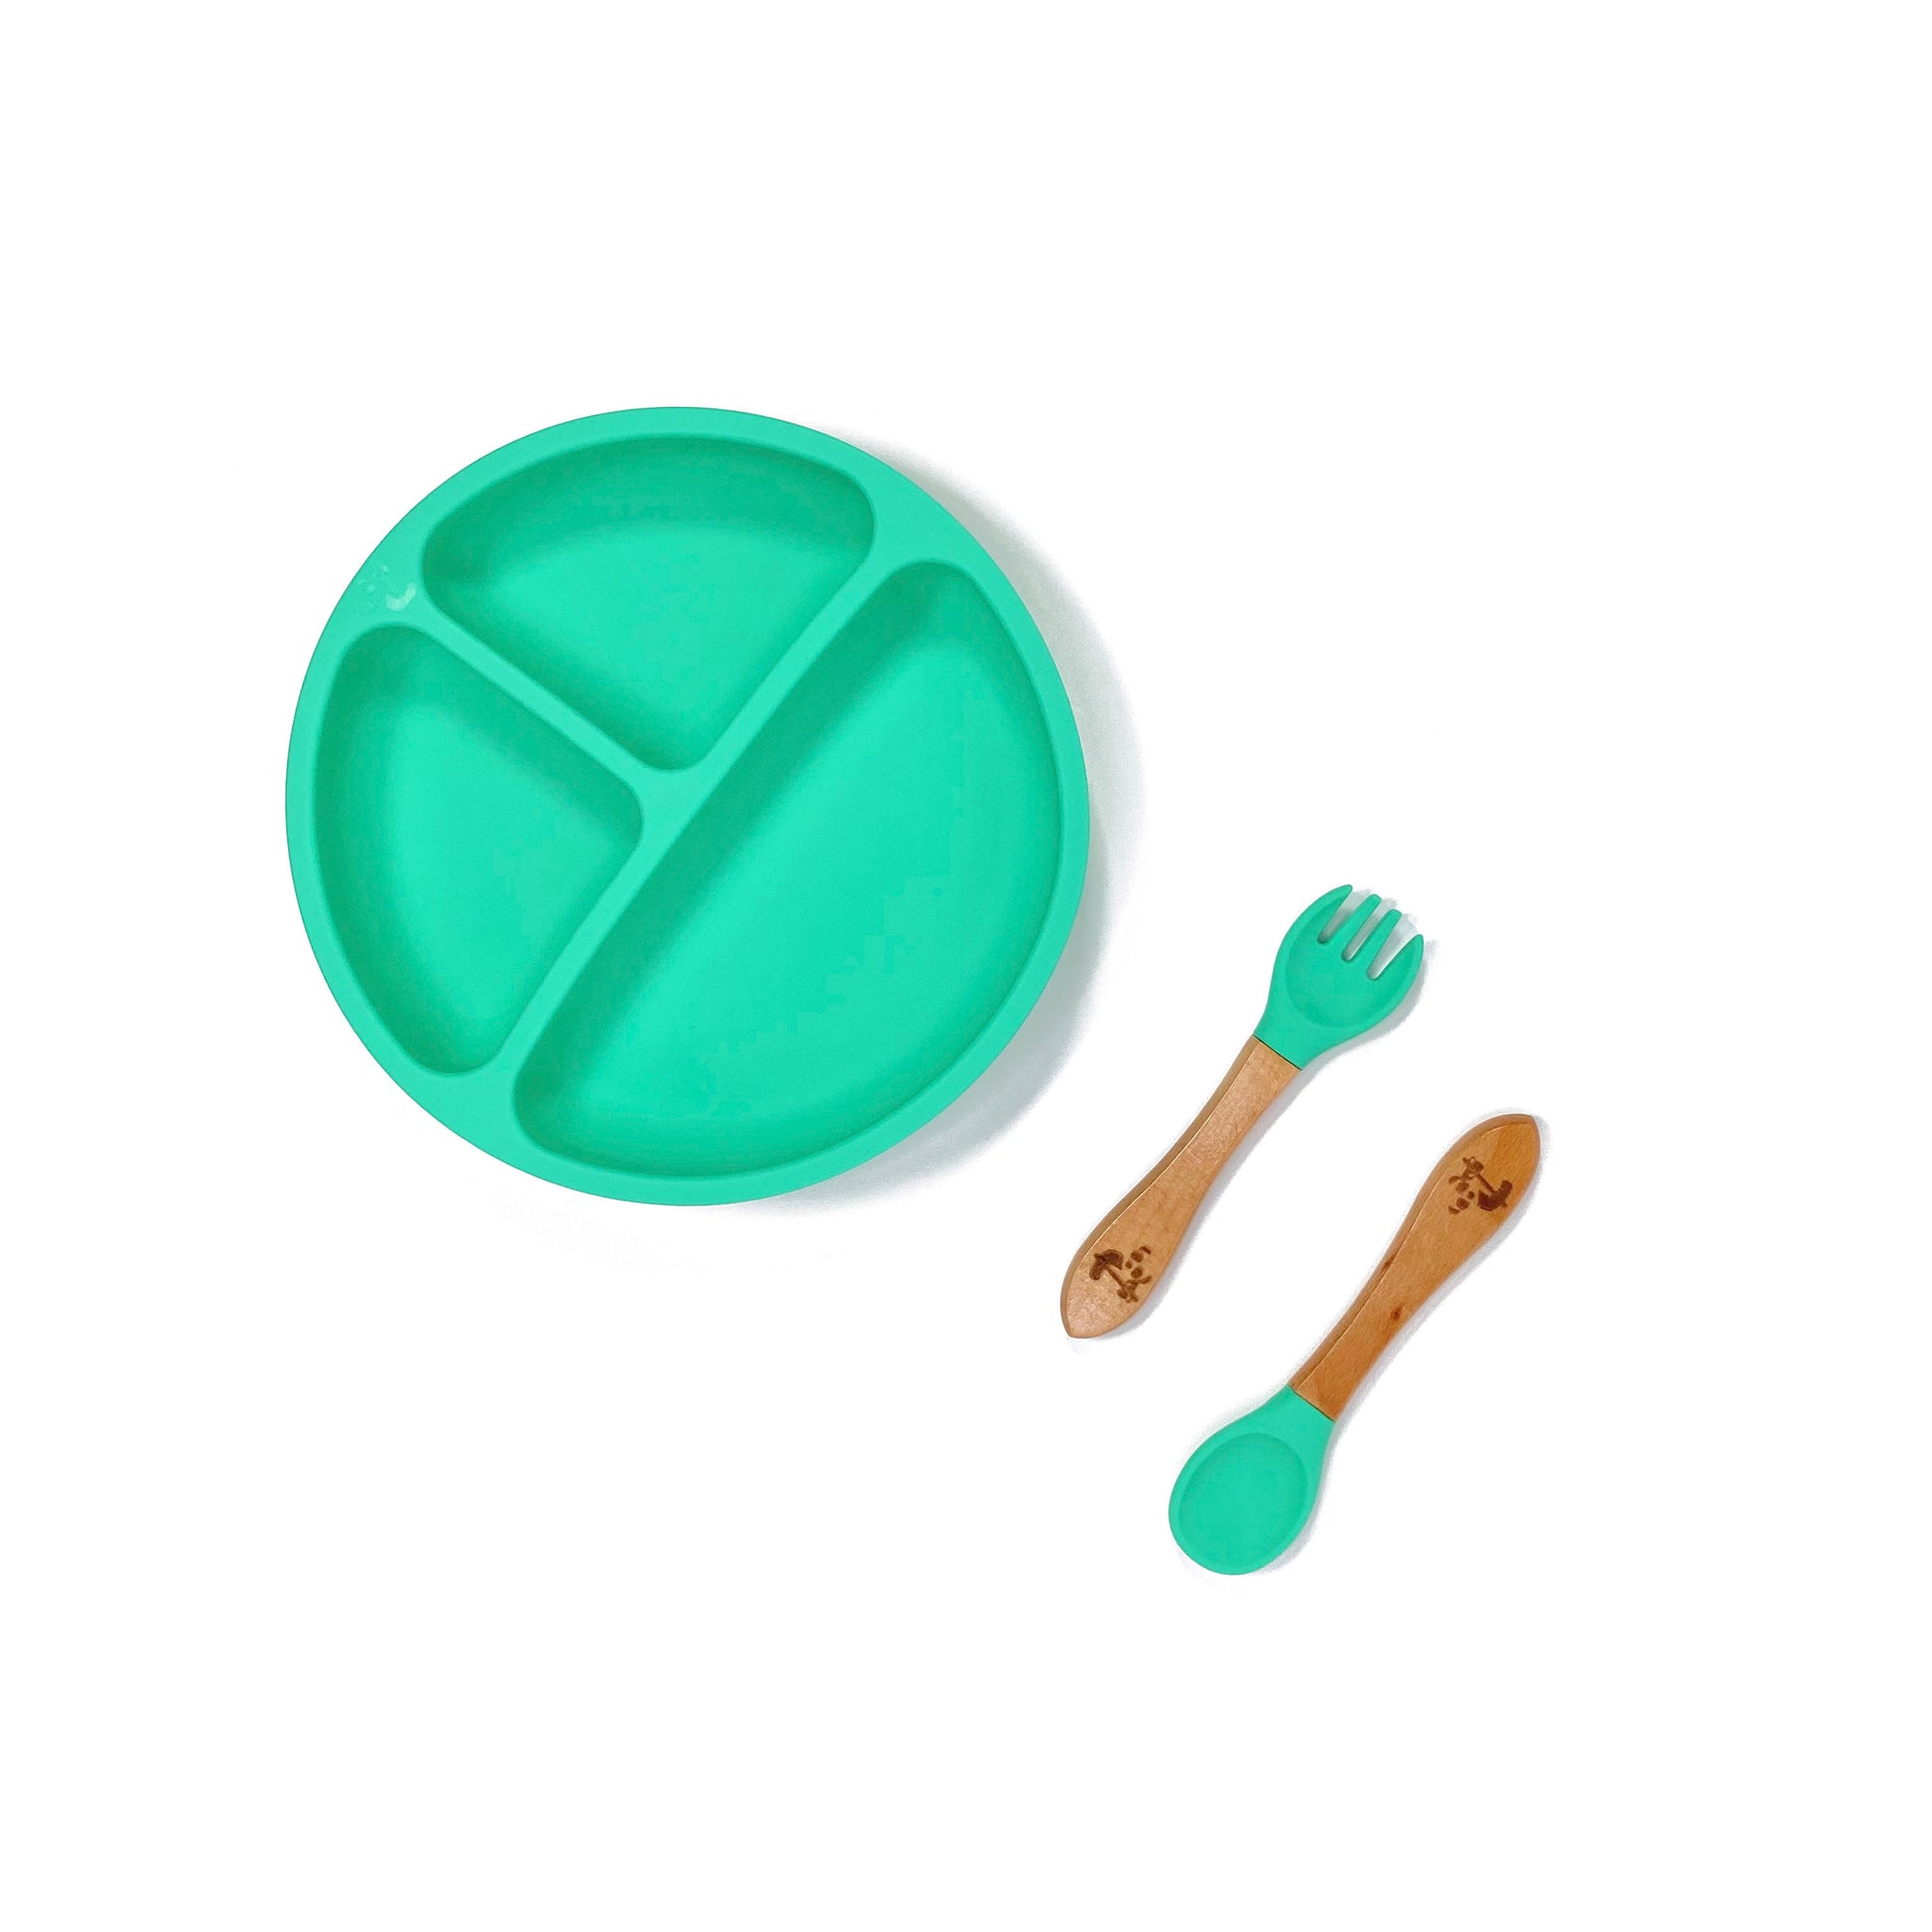 A seafoam green silicone children’s section plate with cups on the base, and matching bamboo and silicone cutlery.